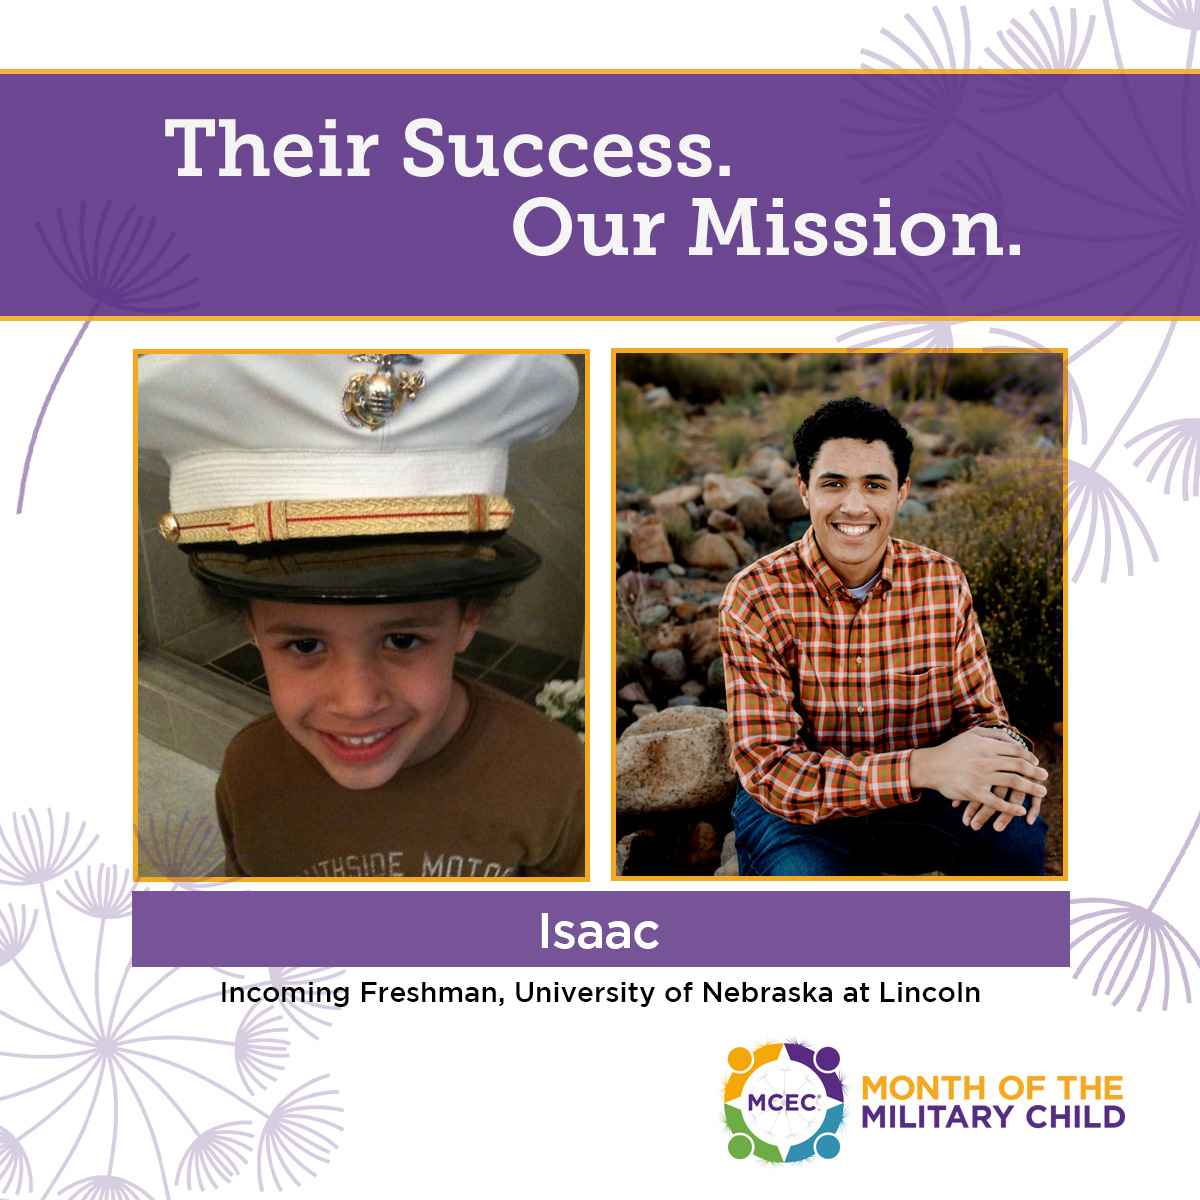 Isaac, driven by his father's unwavering commitment, is determined to carry on the tradition of service. With a deep passion to support Veterans, he aims to make a lasting impact on future service members. Discover more inspiring stories like Isaac's here bit.ly/3ux5EBQ